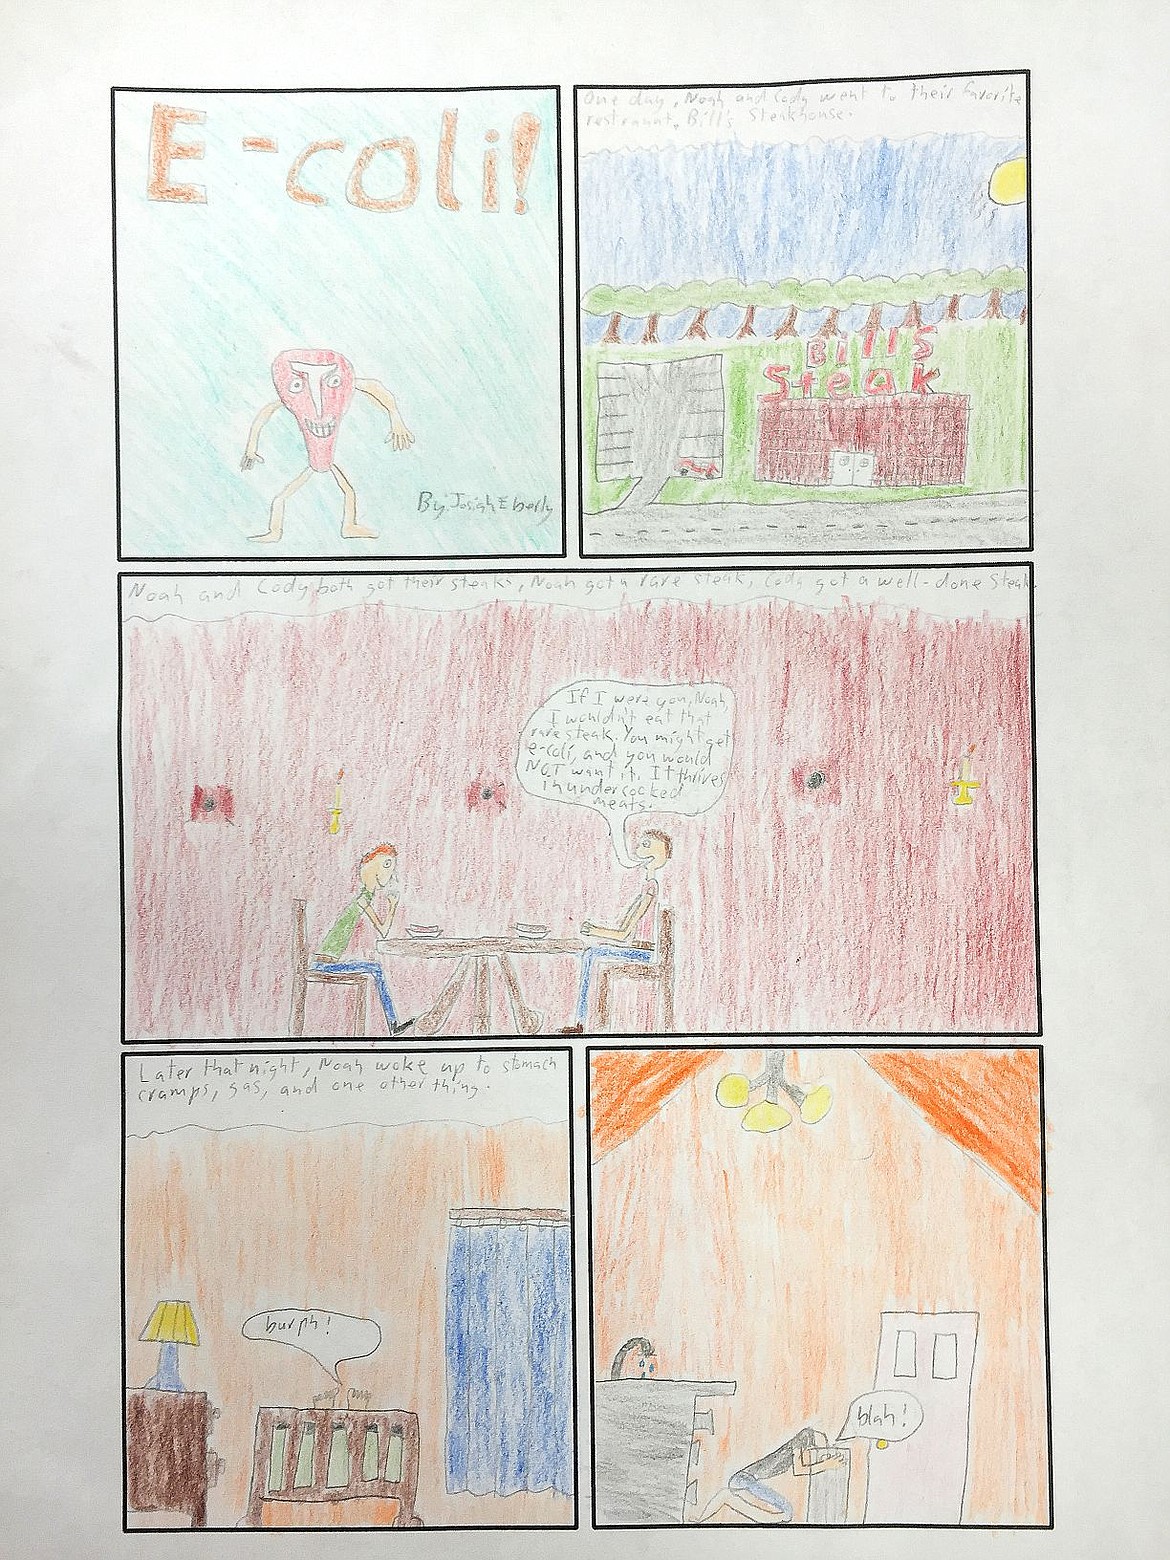 &lt;p&gt;In this panel, eighth-grade student Josiah Eberly illustrates E. coli through a story about two friends visiting a steakhouse. Students in Janelle Gibbs' Young Living class at Post Falls Middle School recently completed a project requiring them to use comics to illustrate their research on foodborne illnesses.&lt;/p&gt;